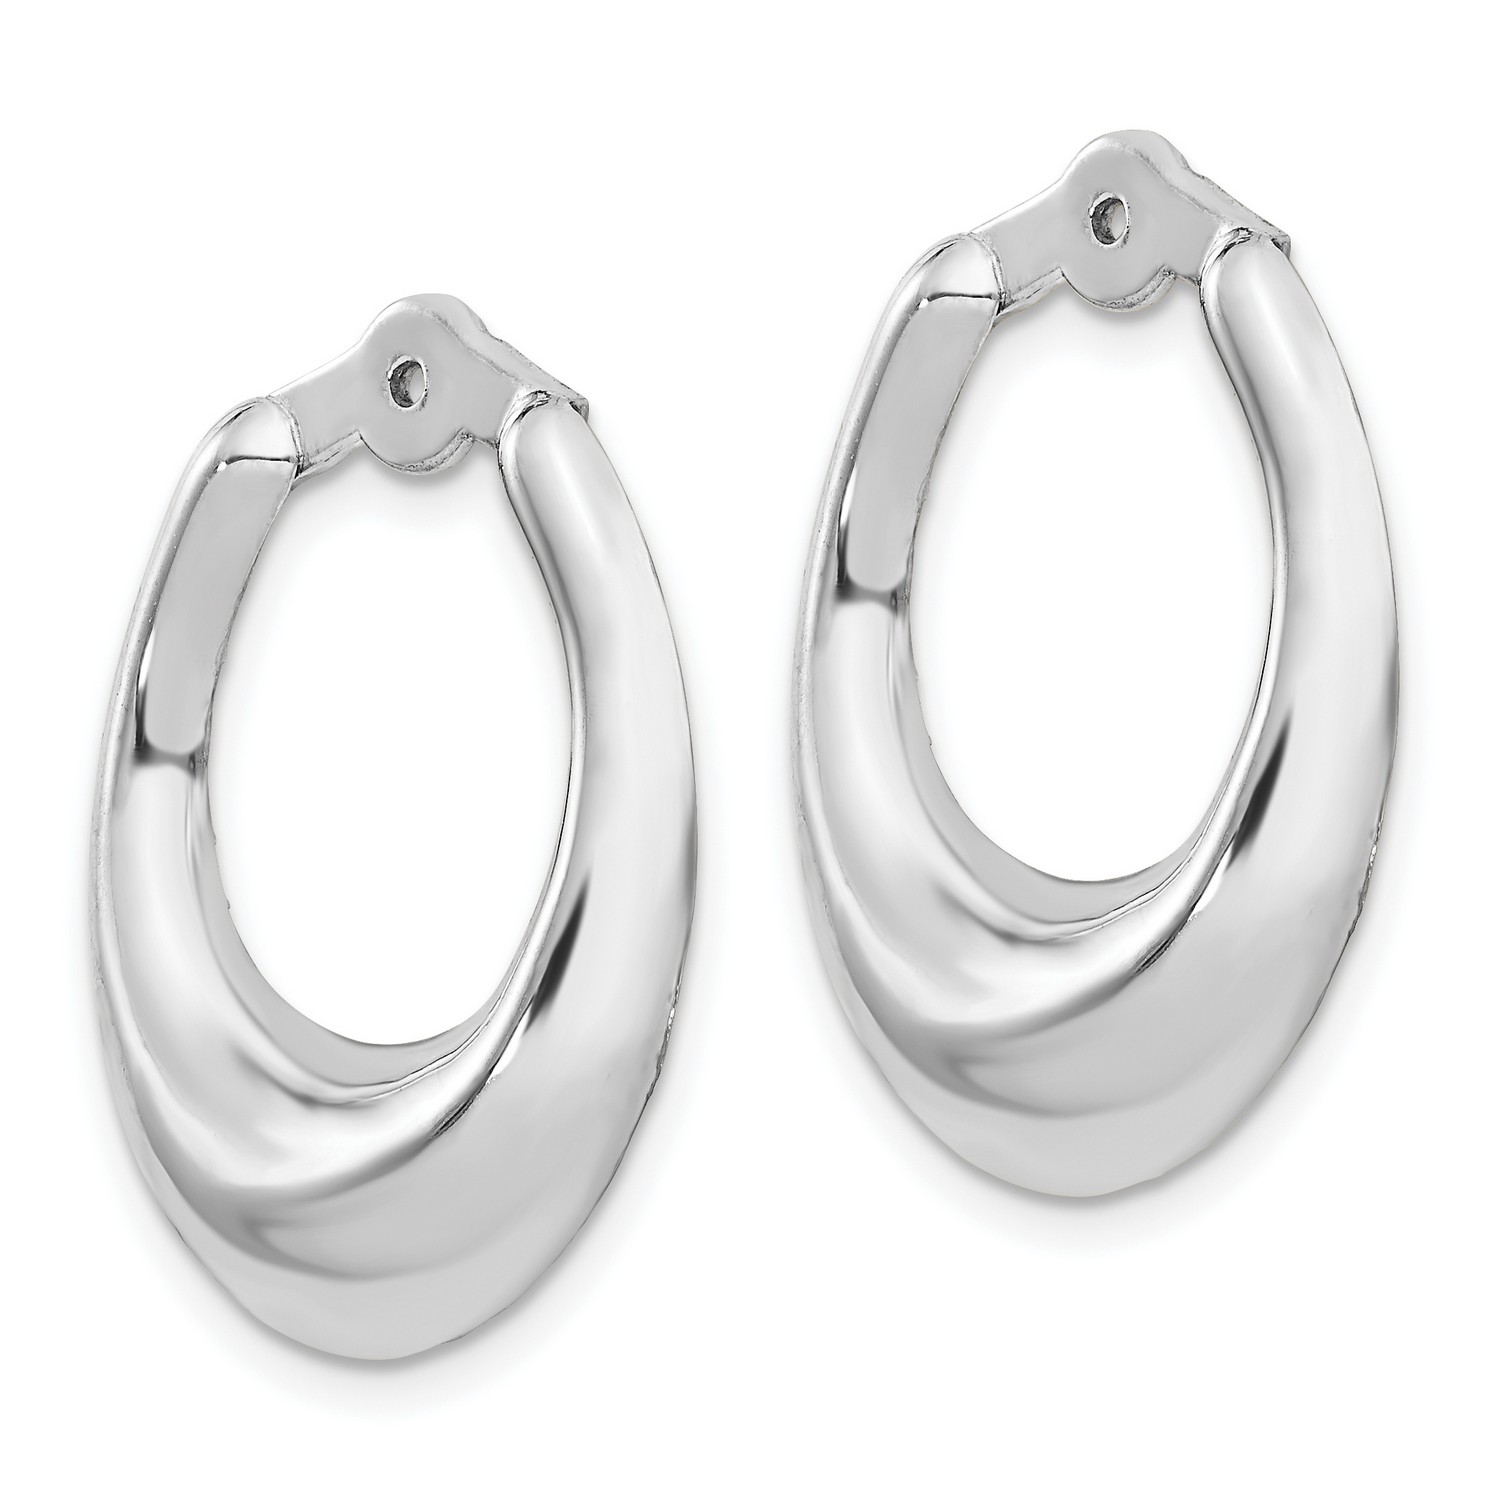 14k White Gold Polished Hoop Earring Jackets 25x18 mm - image 2 of 5